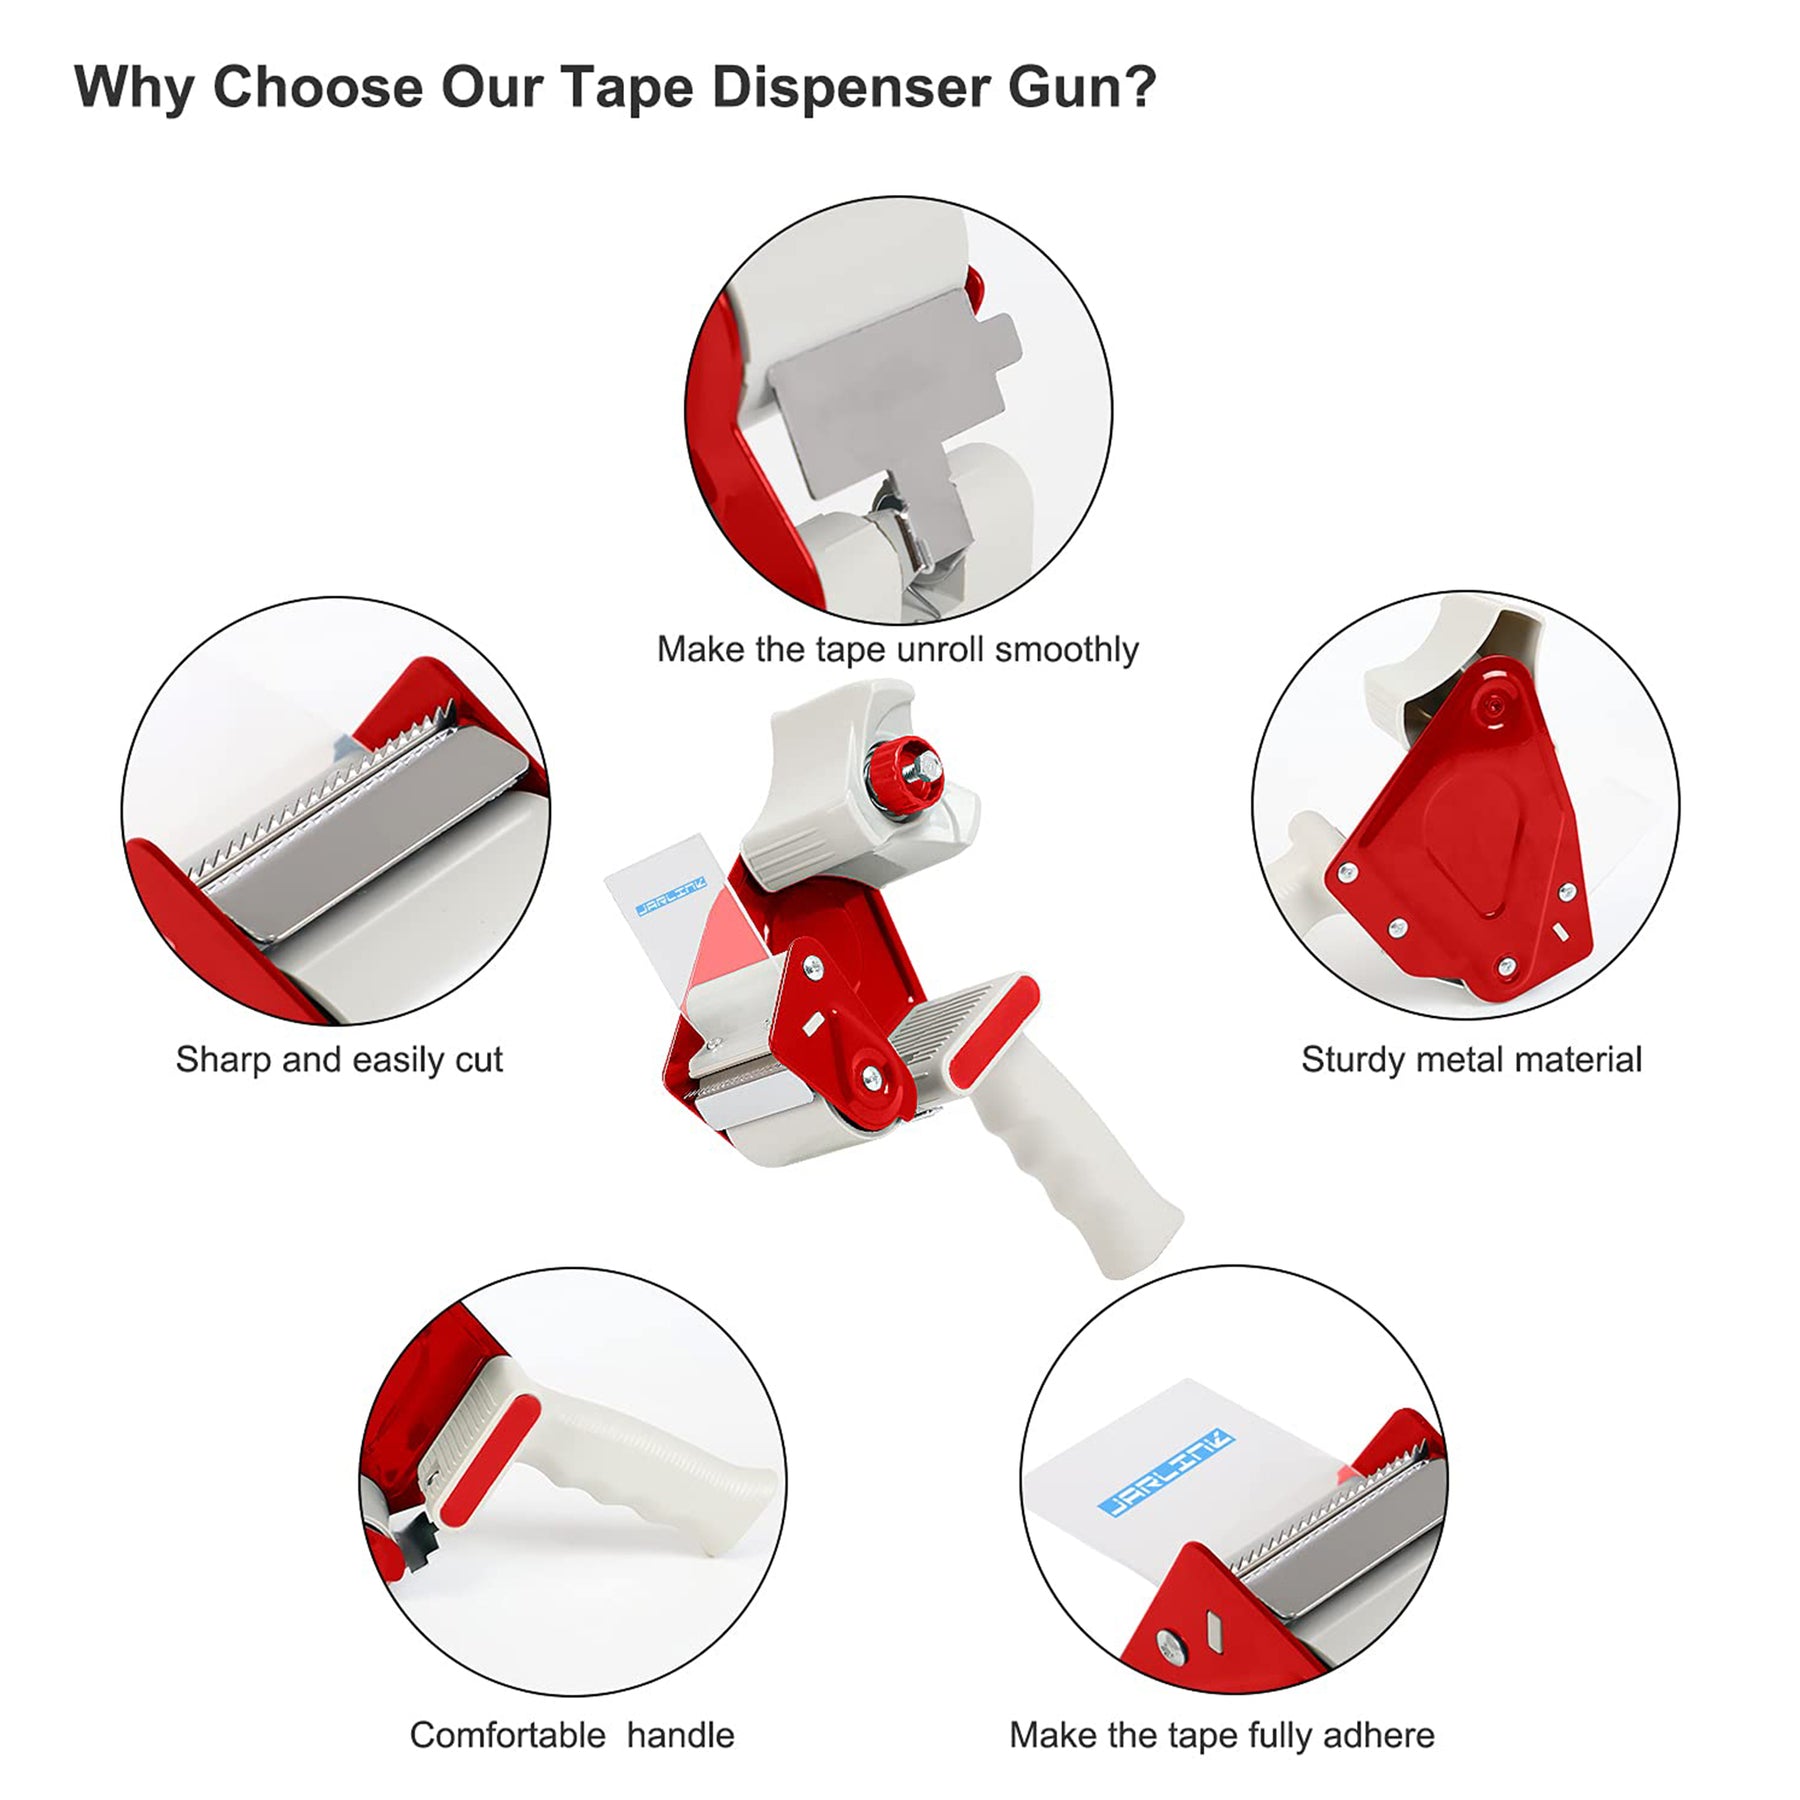 JARLINK Packing Tape Dispenser Gun (2 Pack) with 2 Rolls Tape, 2 inches Lightweight Industrial Side Loading Tape Dispenser for Shipping Packaging Moving Sealing